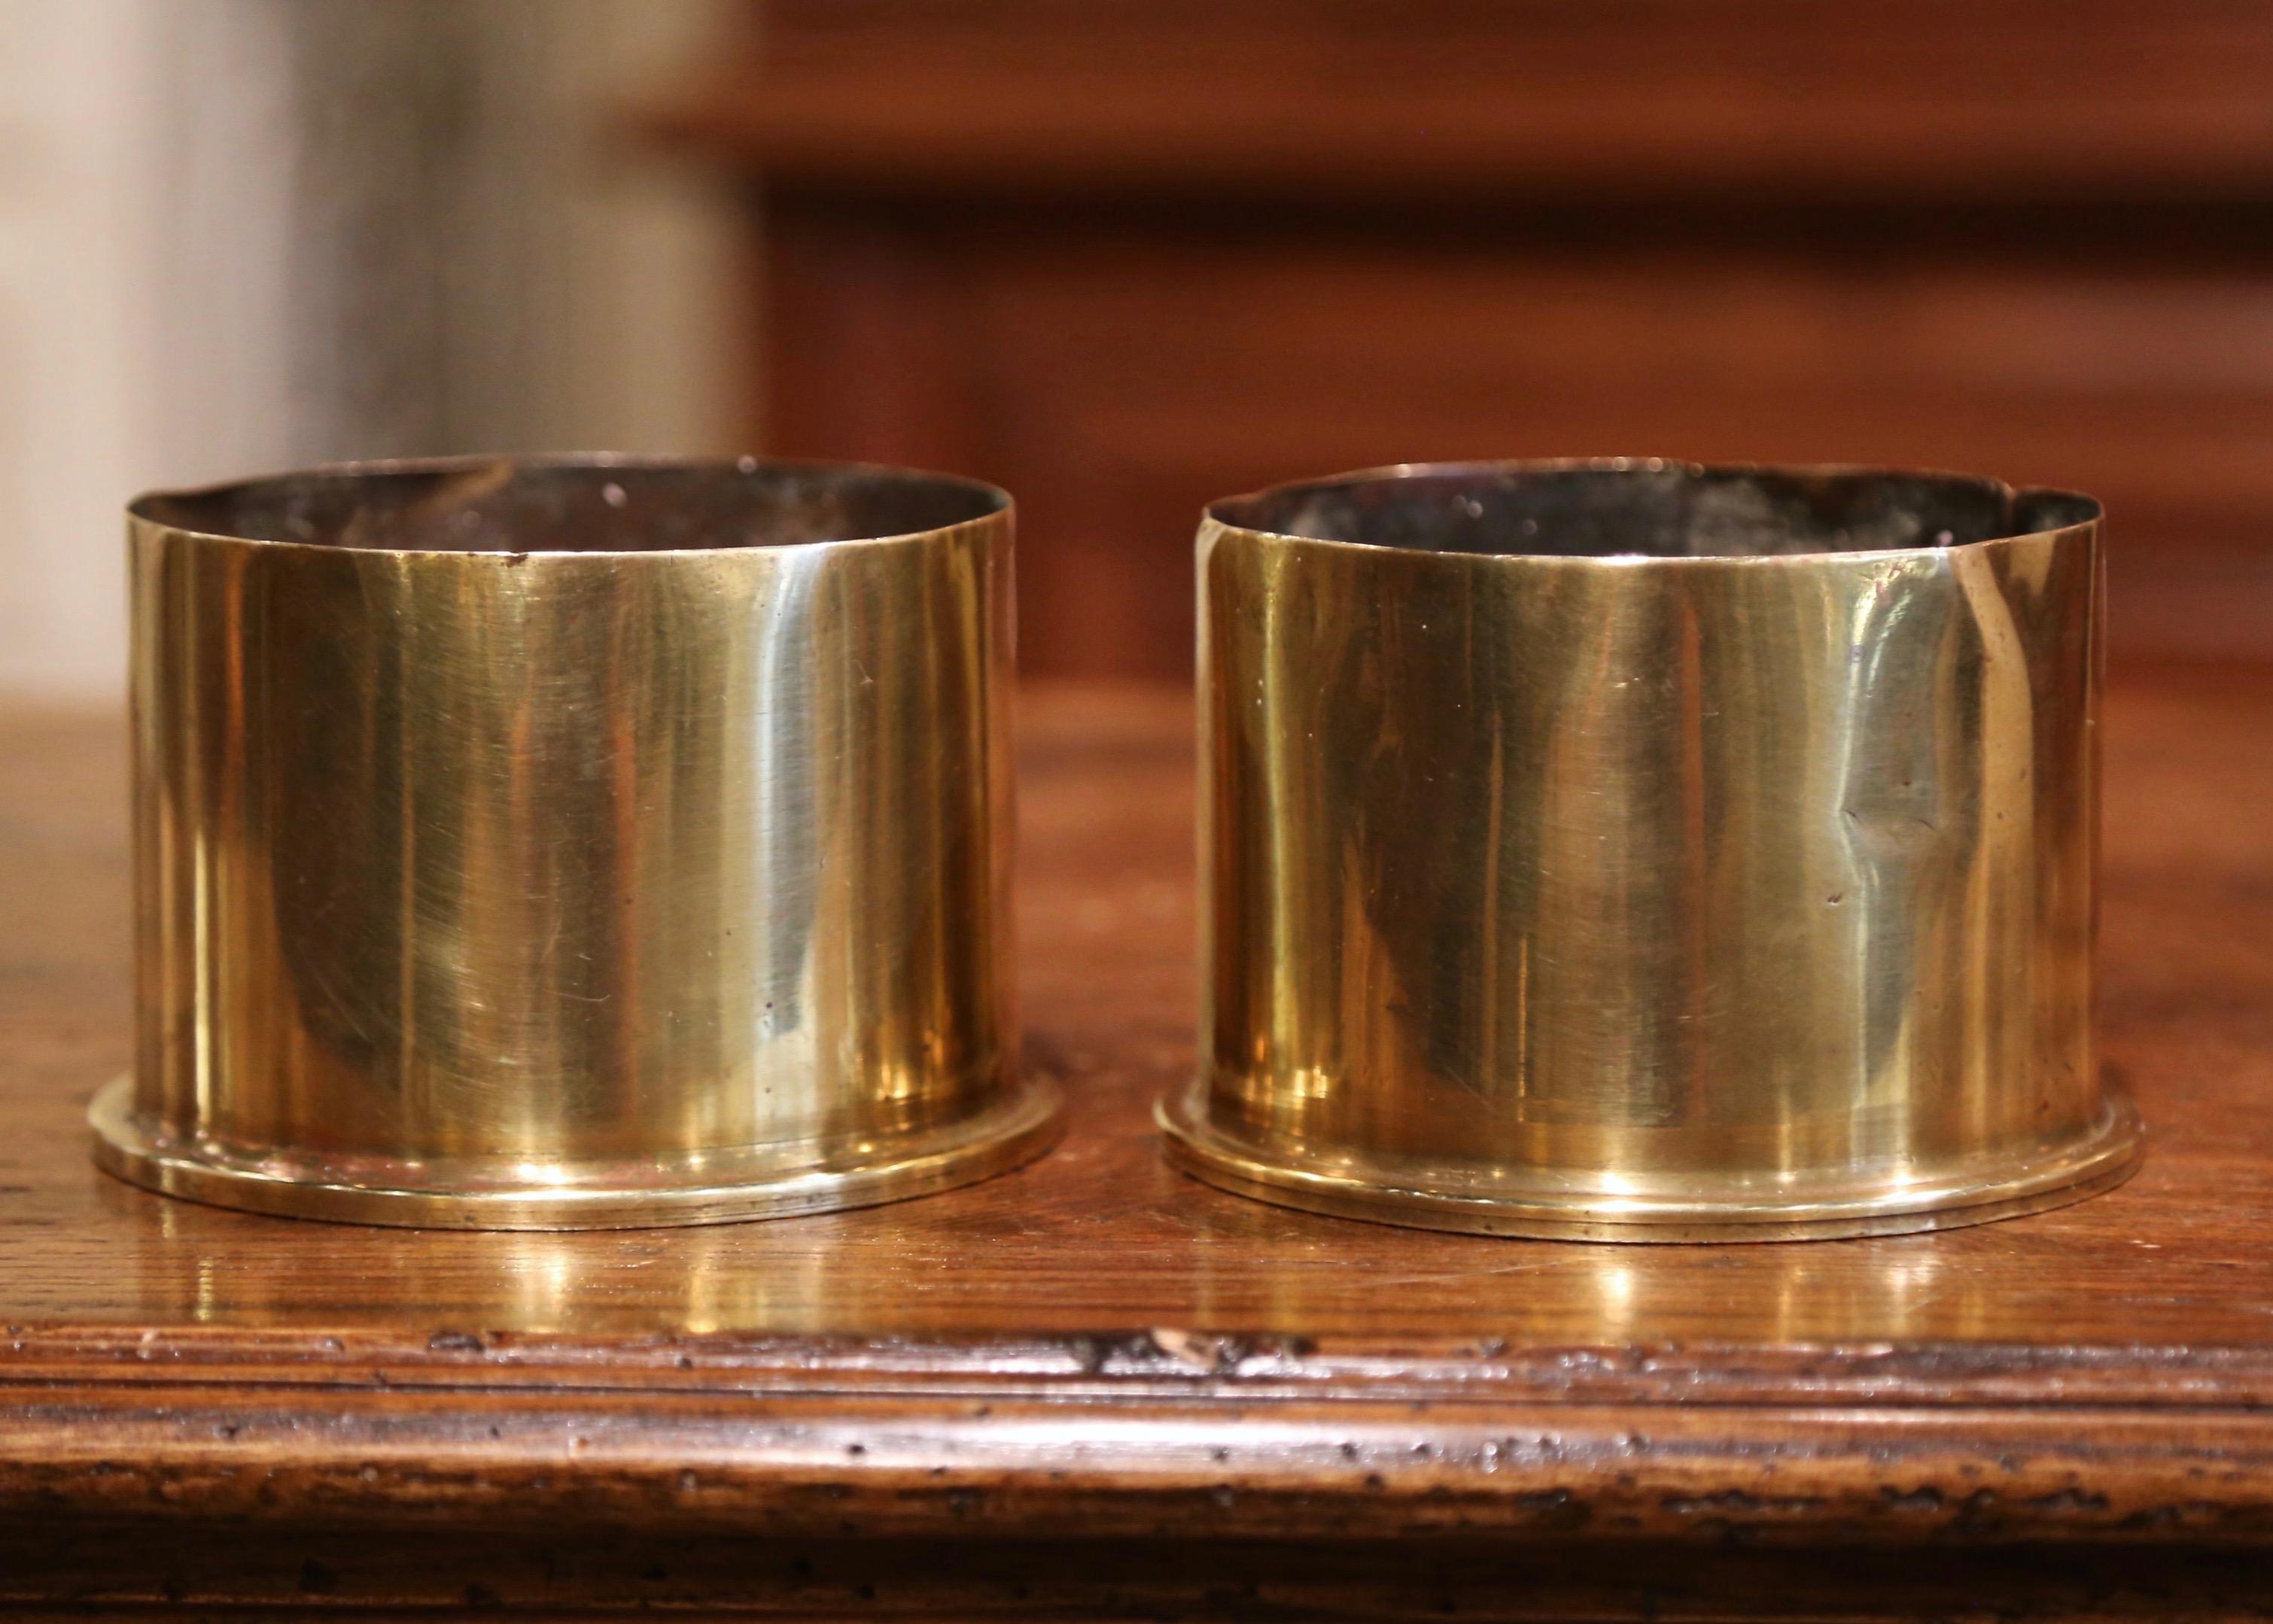 Take a piece of history into your home with these authentic English bombshells from the First World War (WWI 1914-1918). Made of brass, the impressive pieces of artillery are round in shape and dated on the bottom 1917. These one of a kind